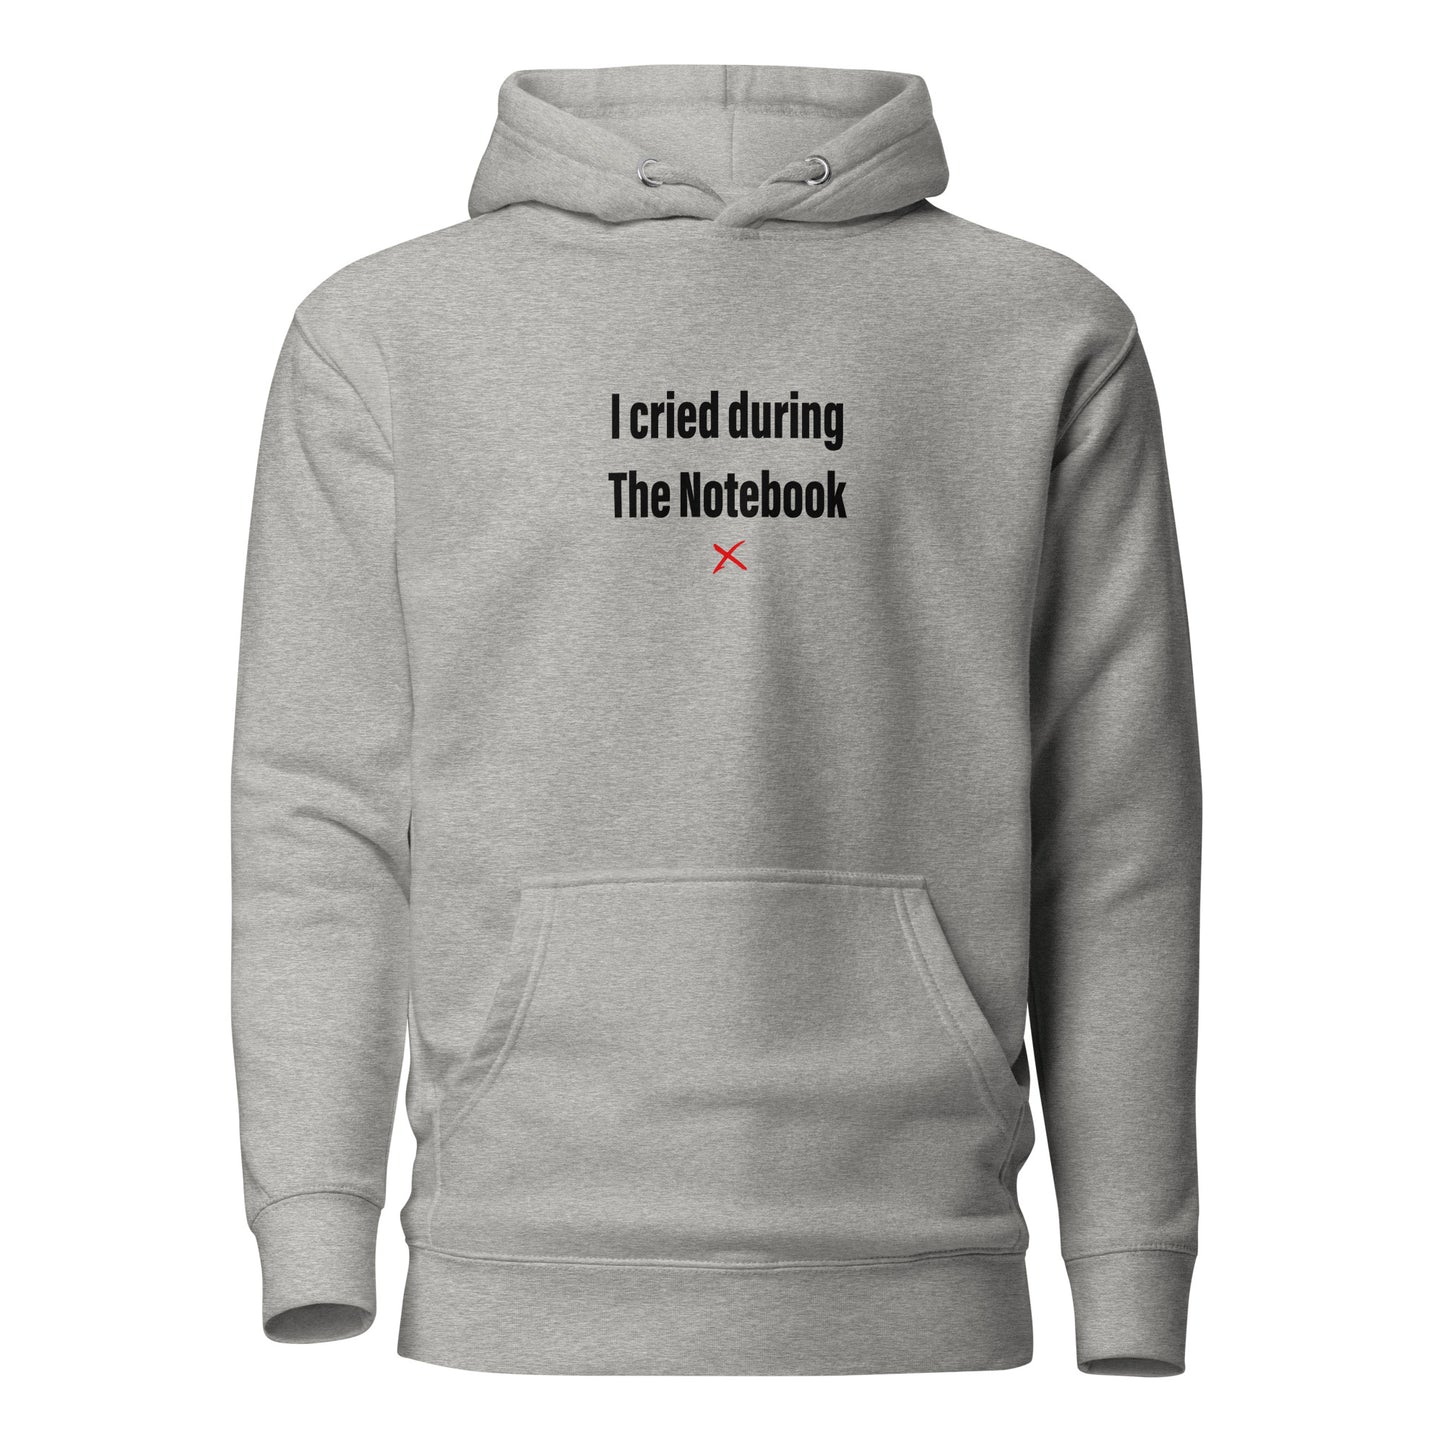 I cried during The Notebook - Hoodie